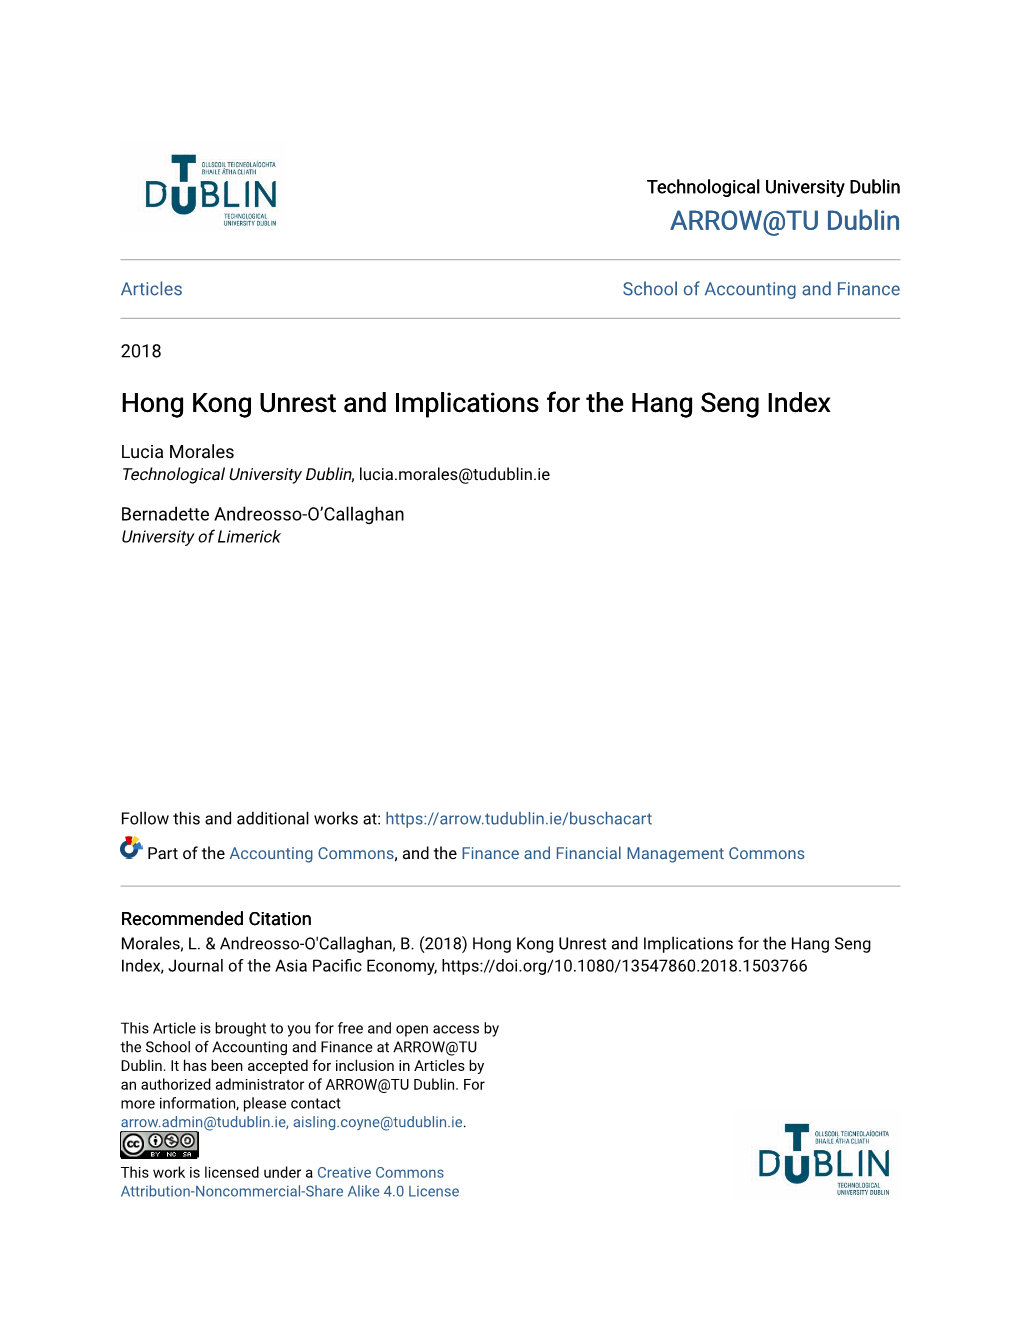 Hong Kong Unrest and Implications for the Hang Seng Index